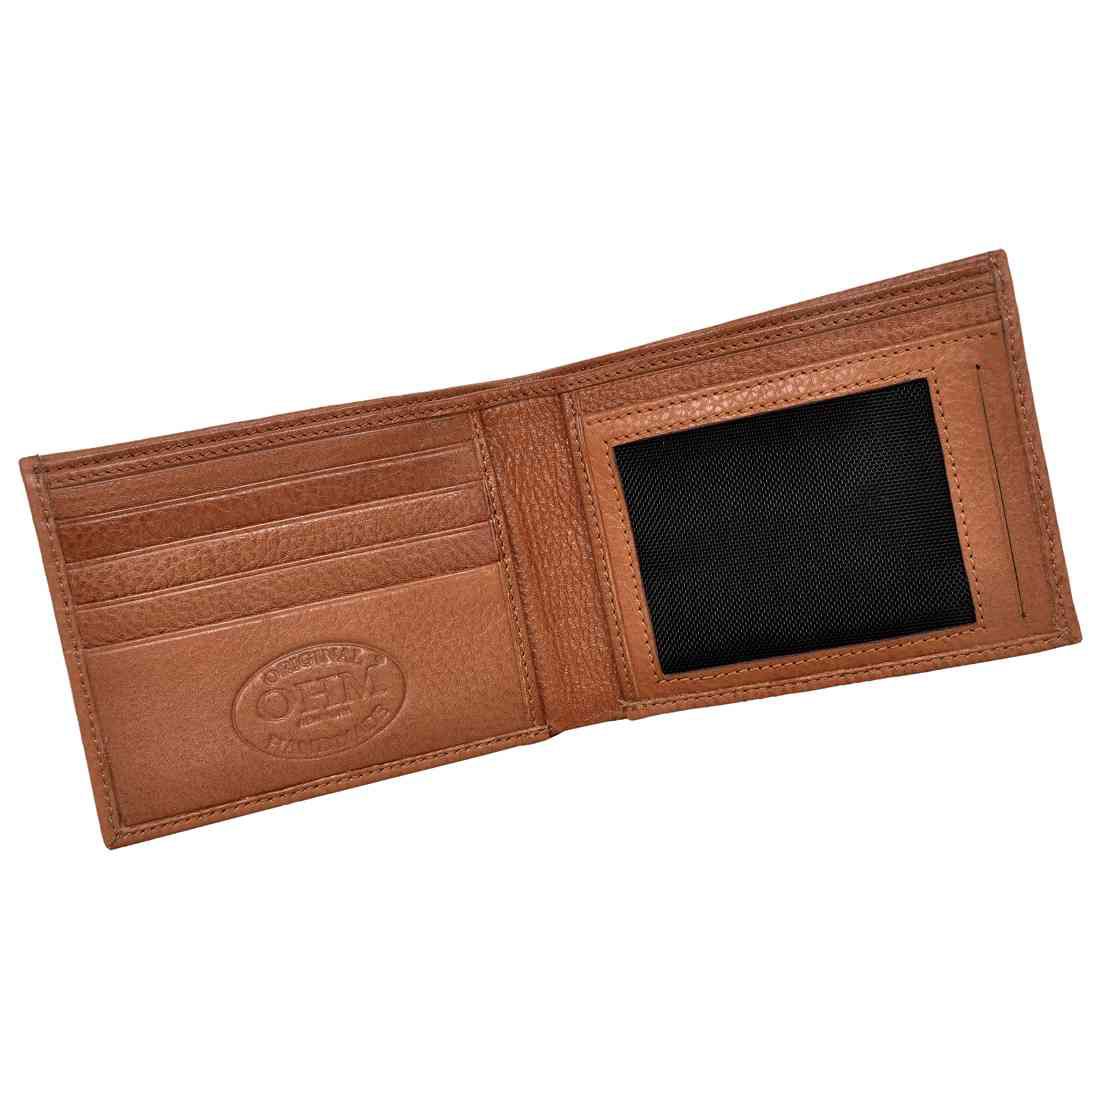 OHM New York Bill Fold Leather Wallet in Tan Color